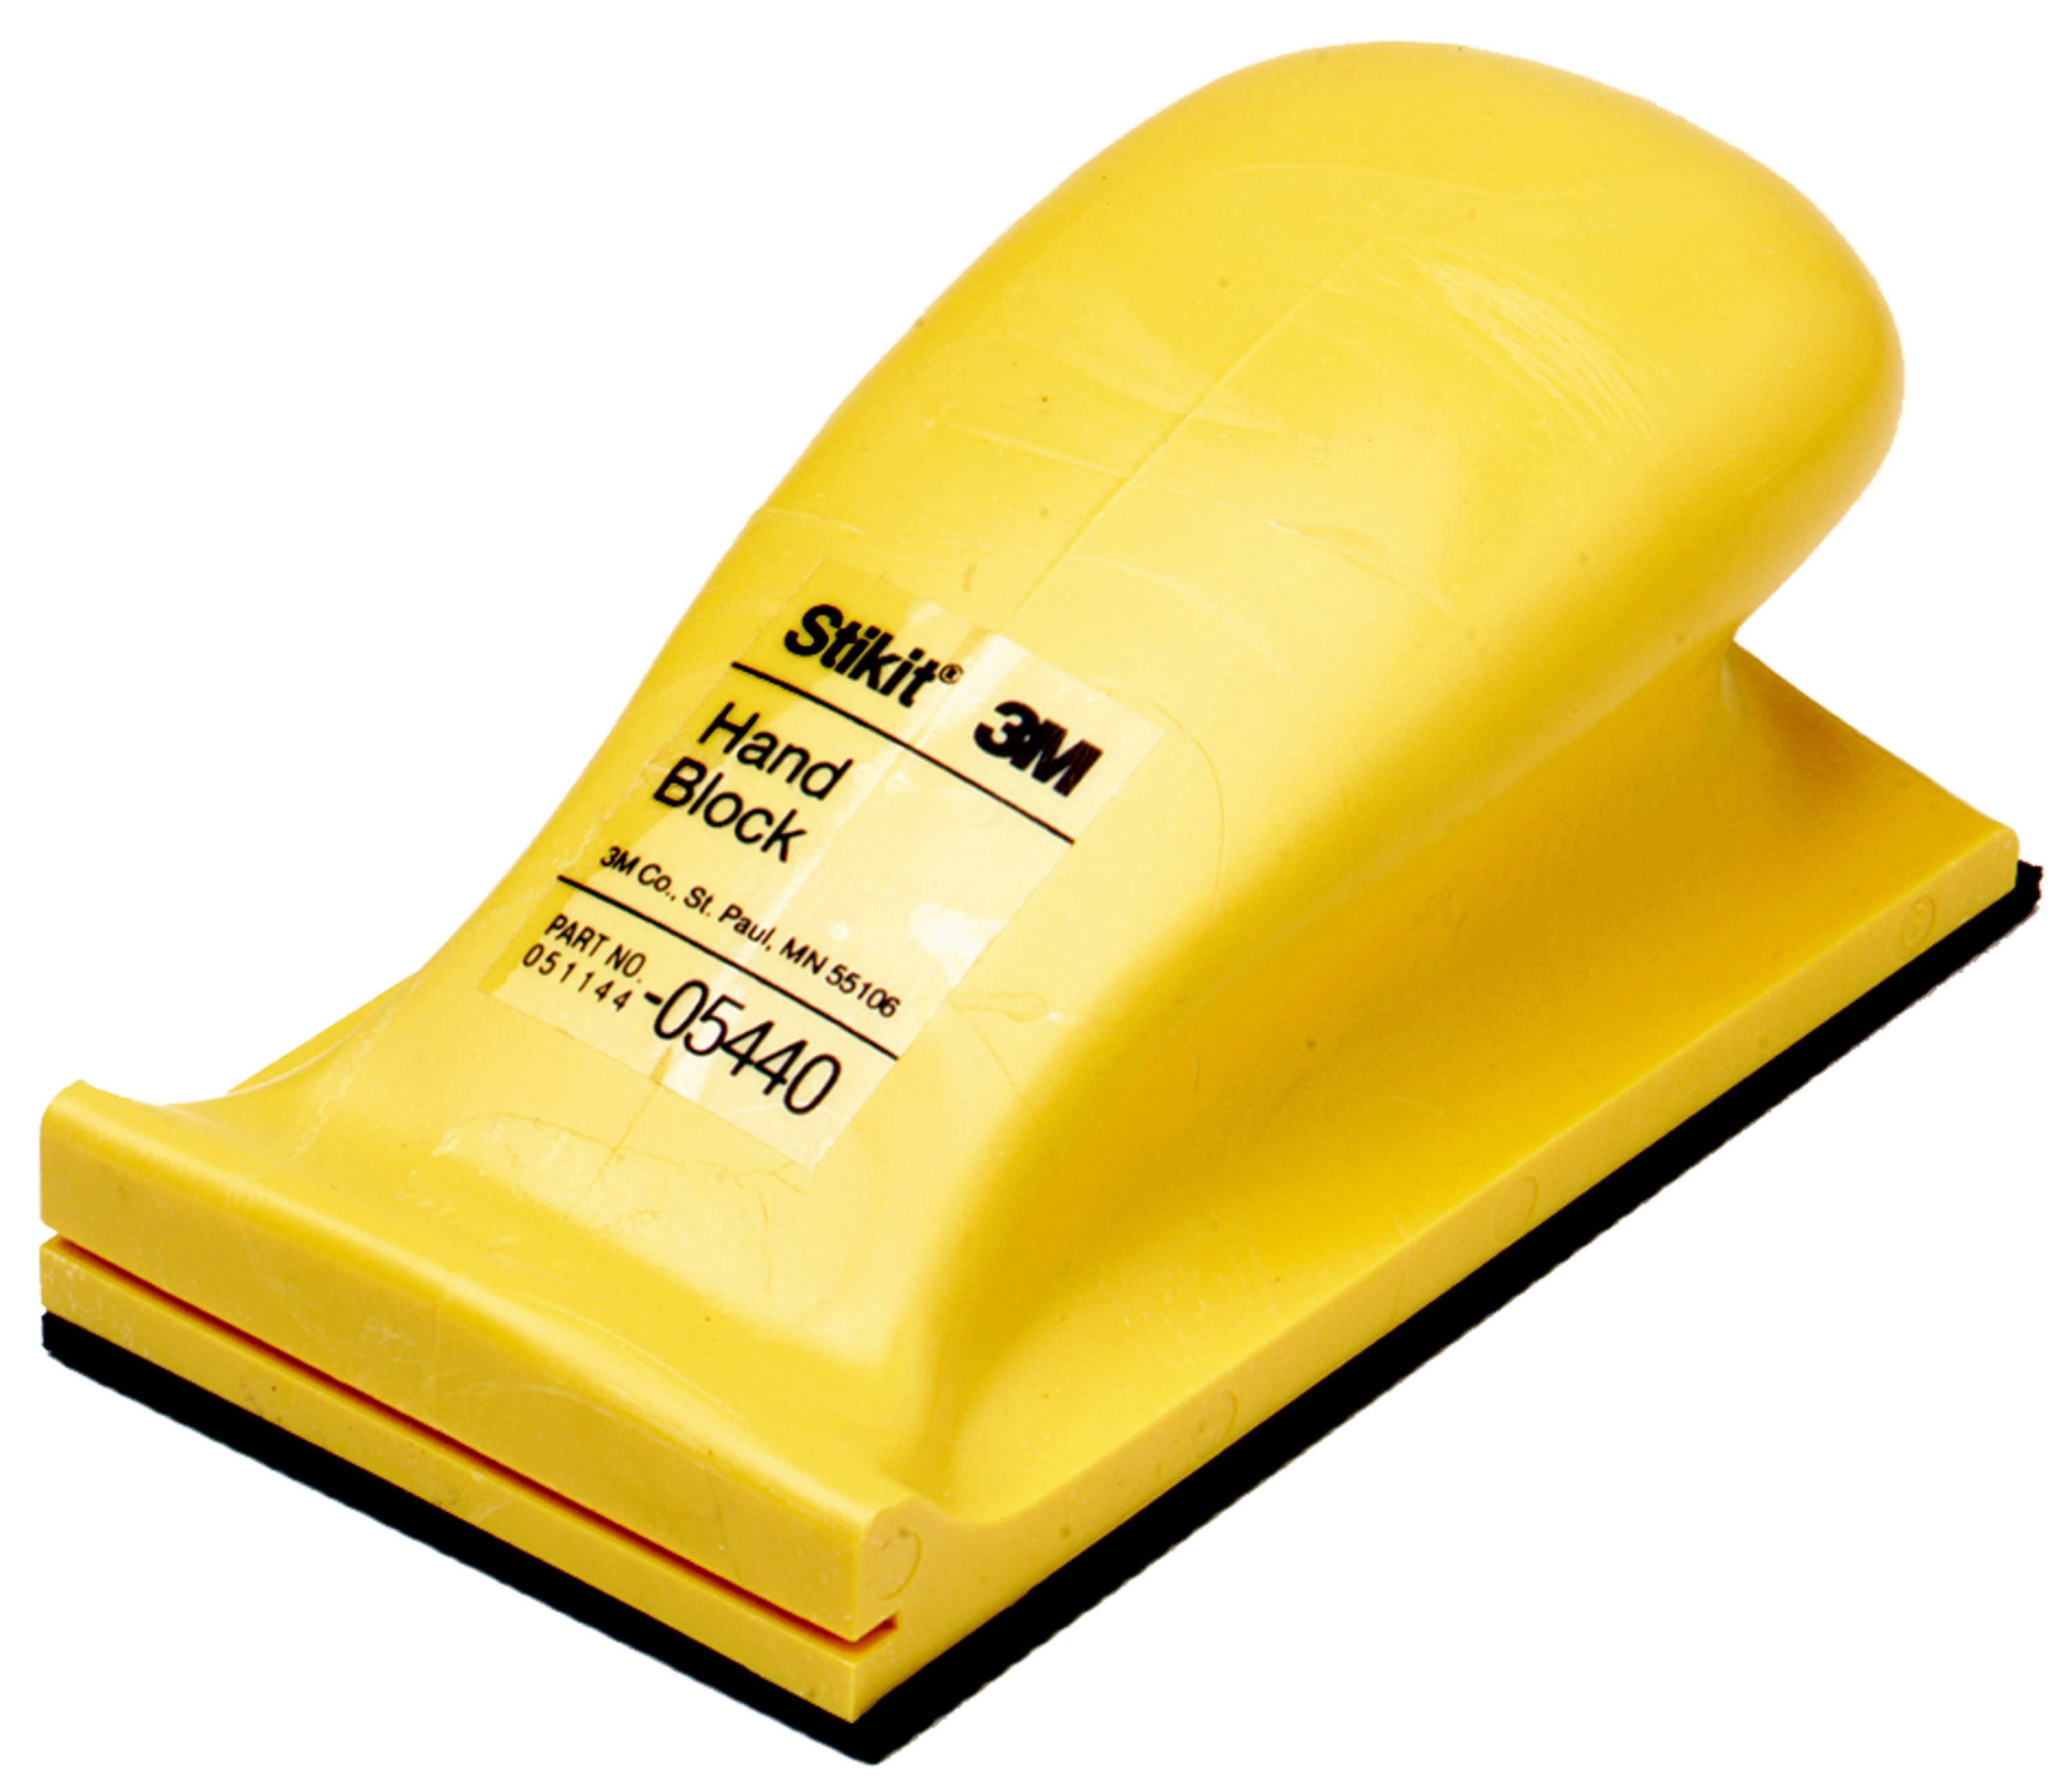 The Stikit hand block distributes pressure evenly, so you get and maintain a flat surface.